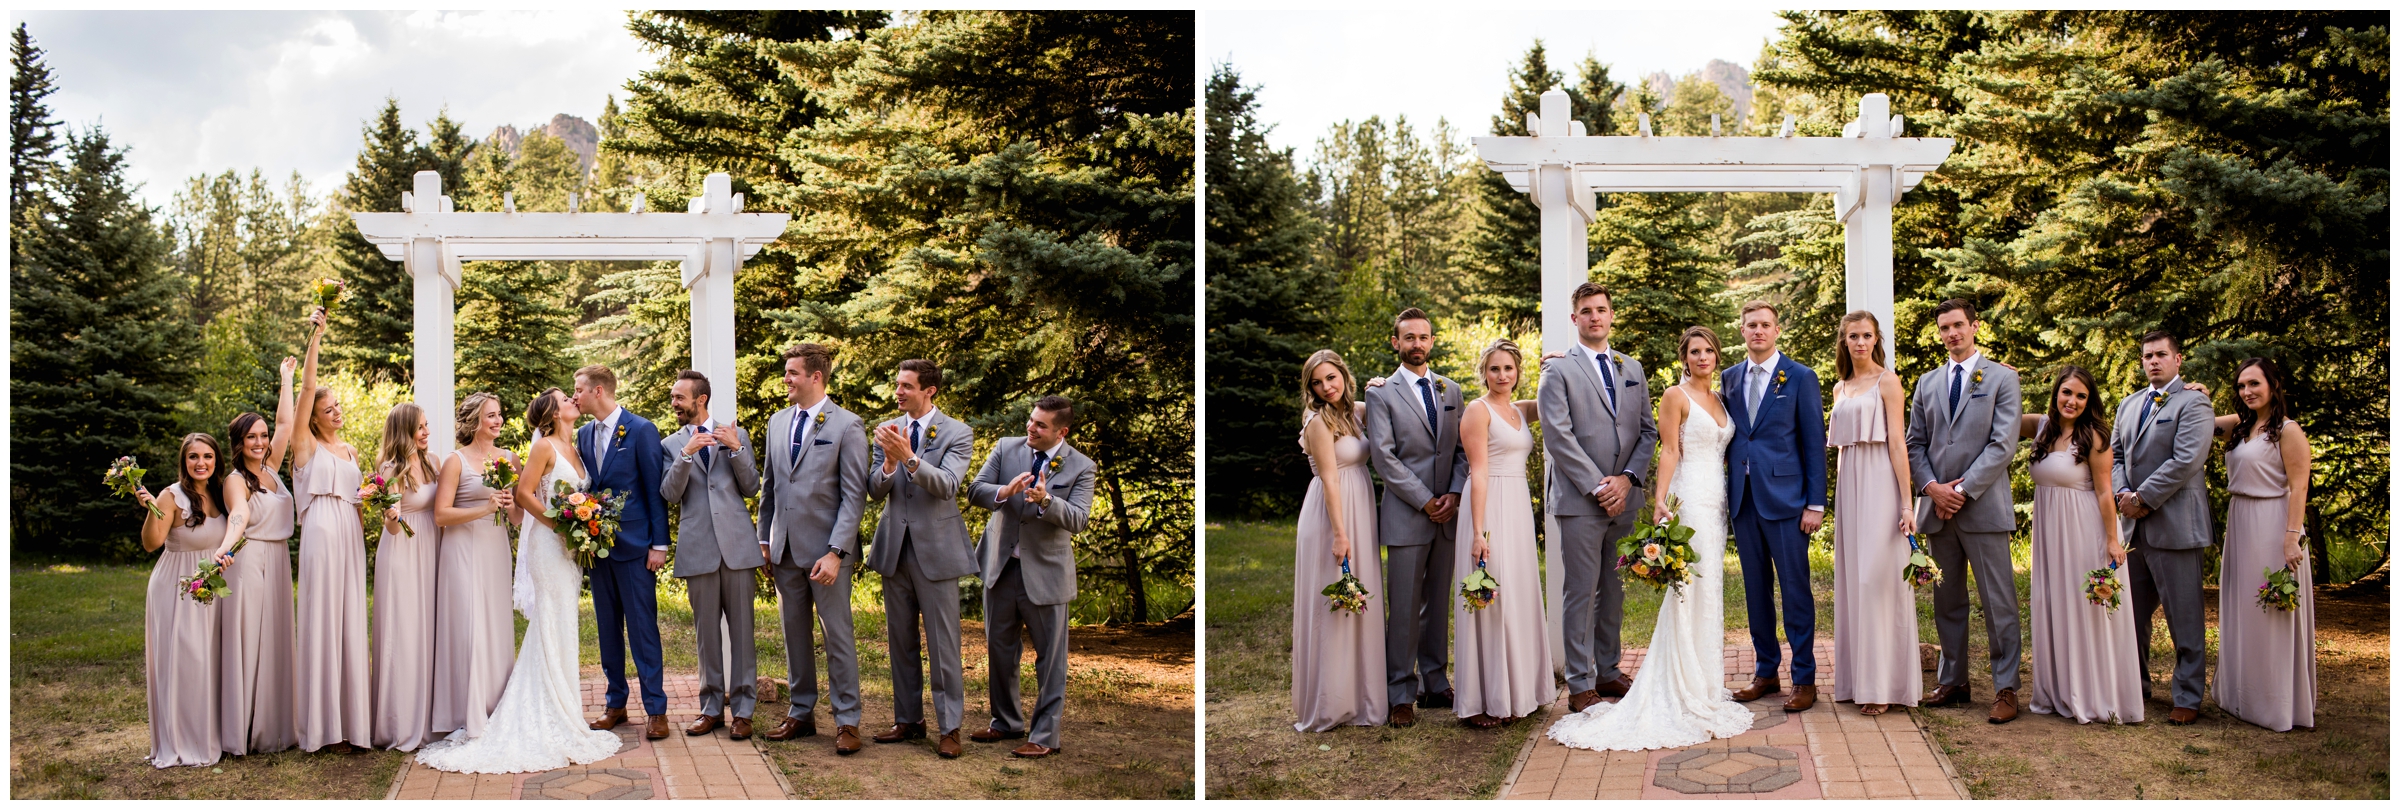 wedding party in lilac and gray